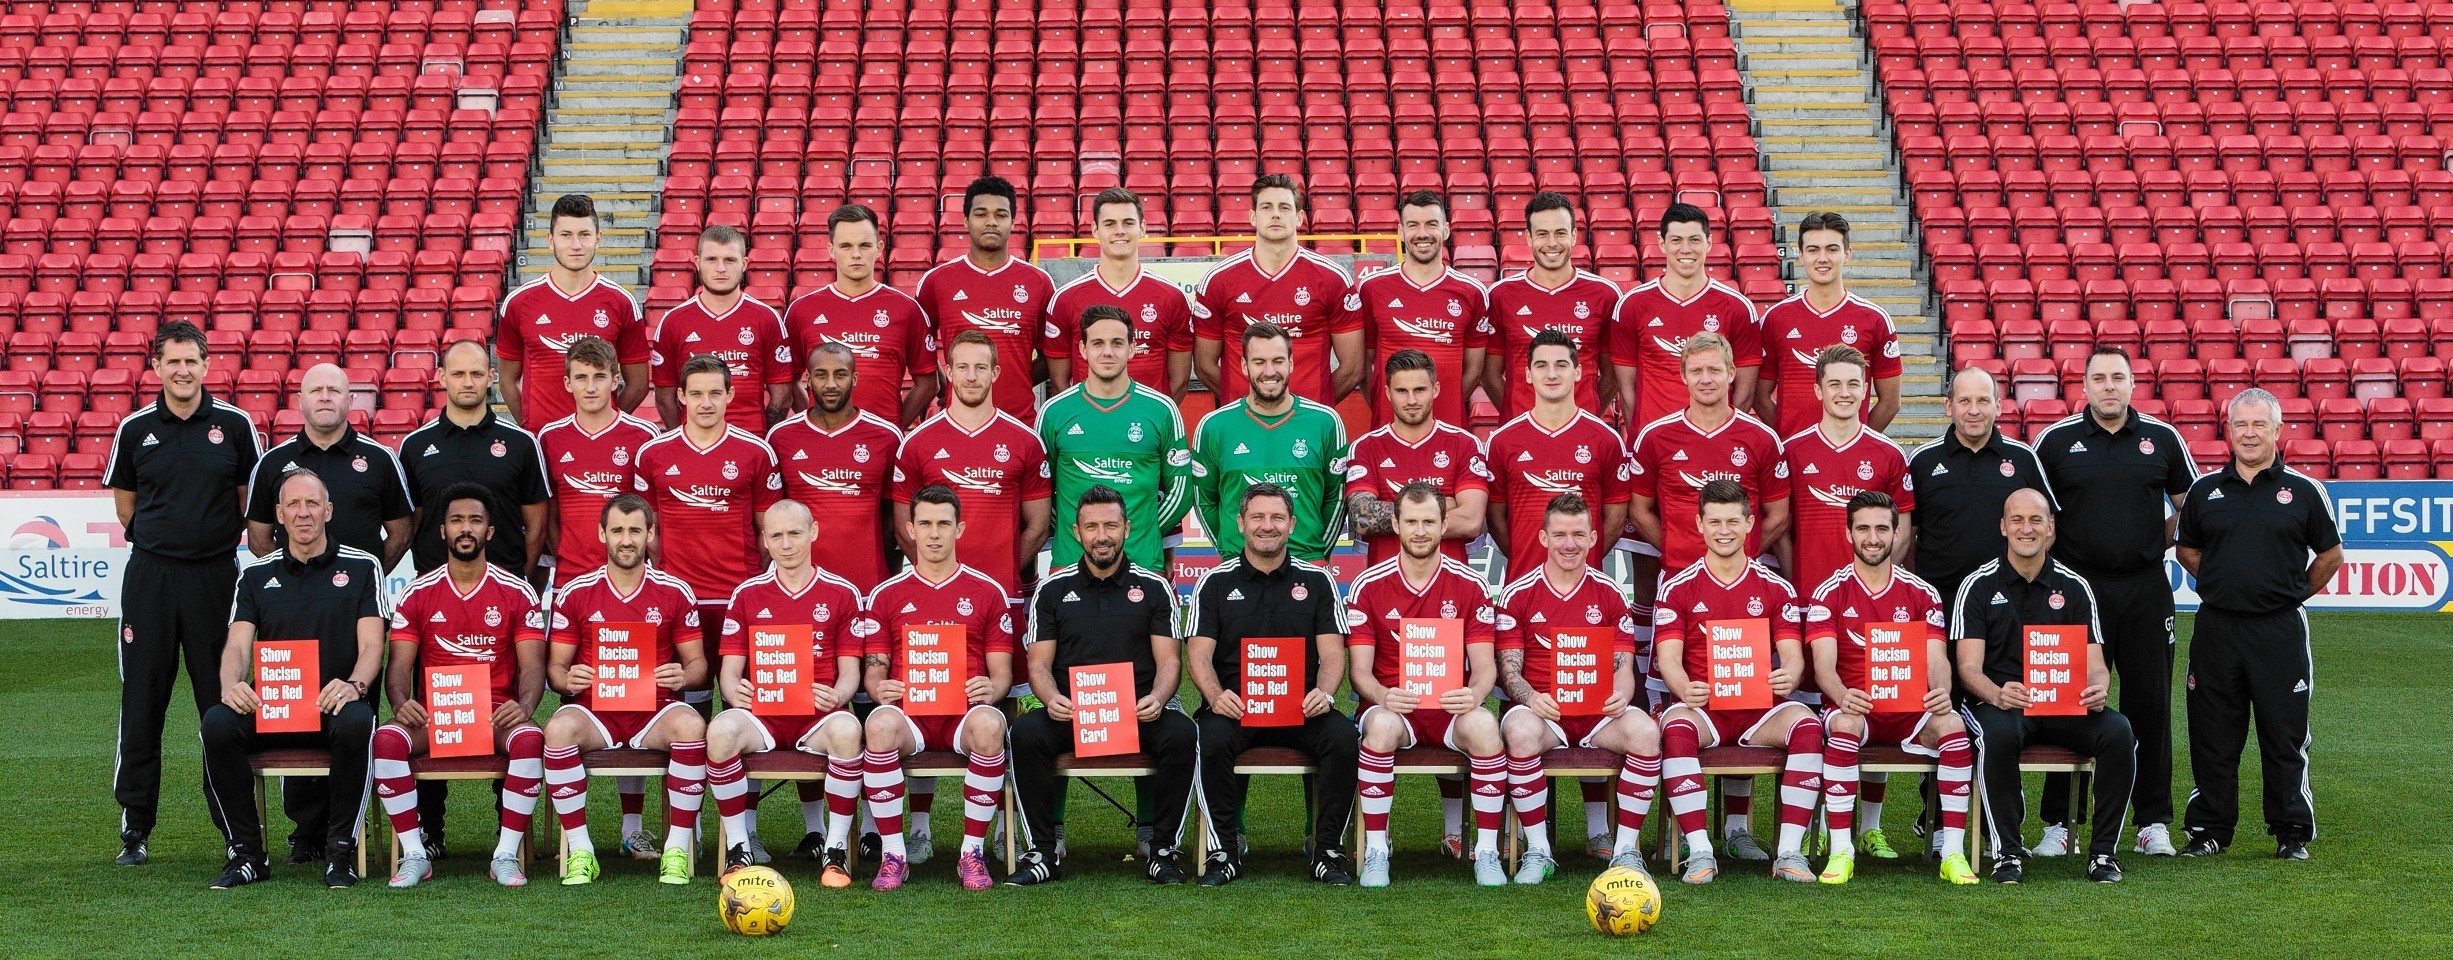 Parker and the rest of the Dons team at yesterday's official photoshoot